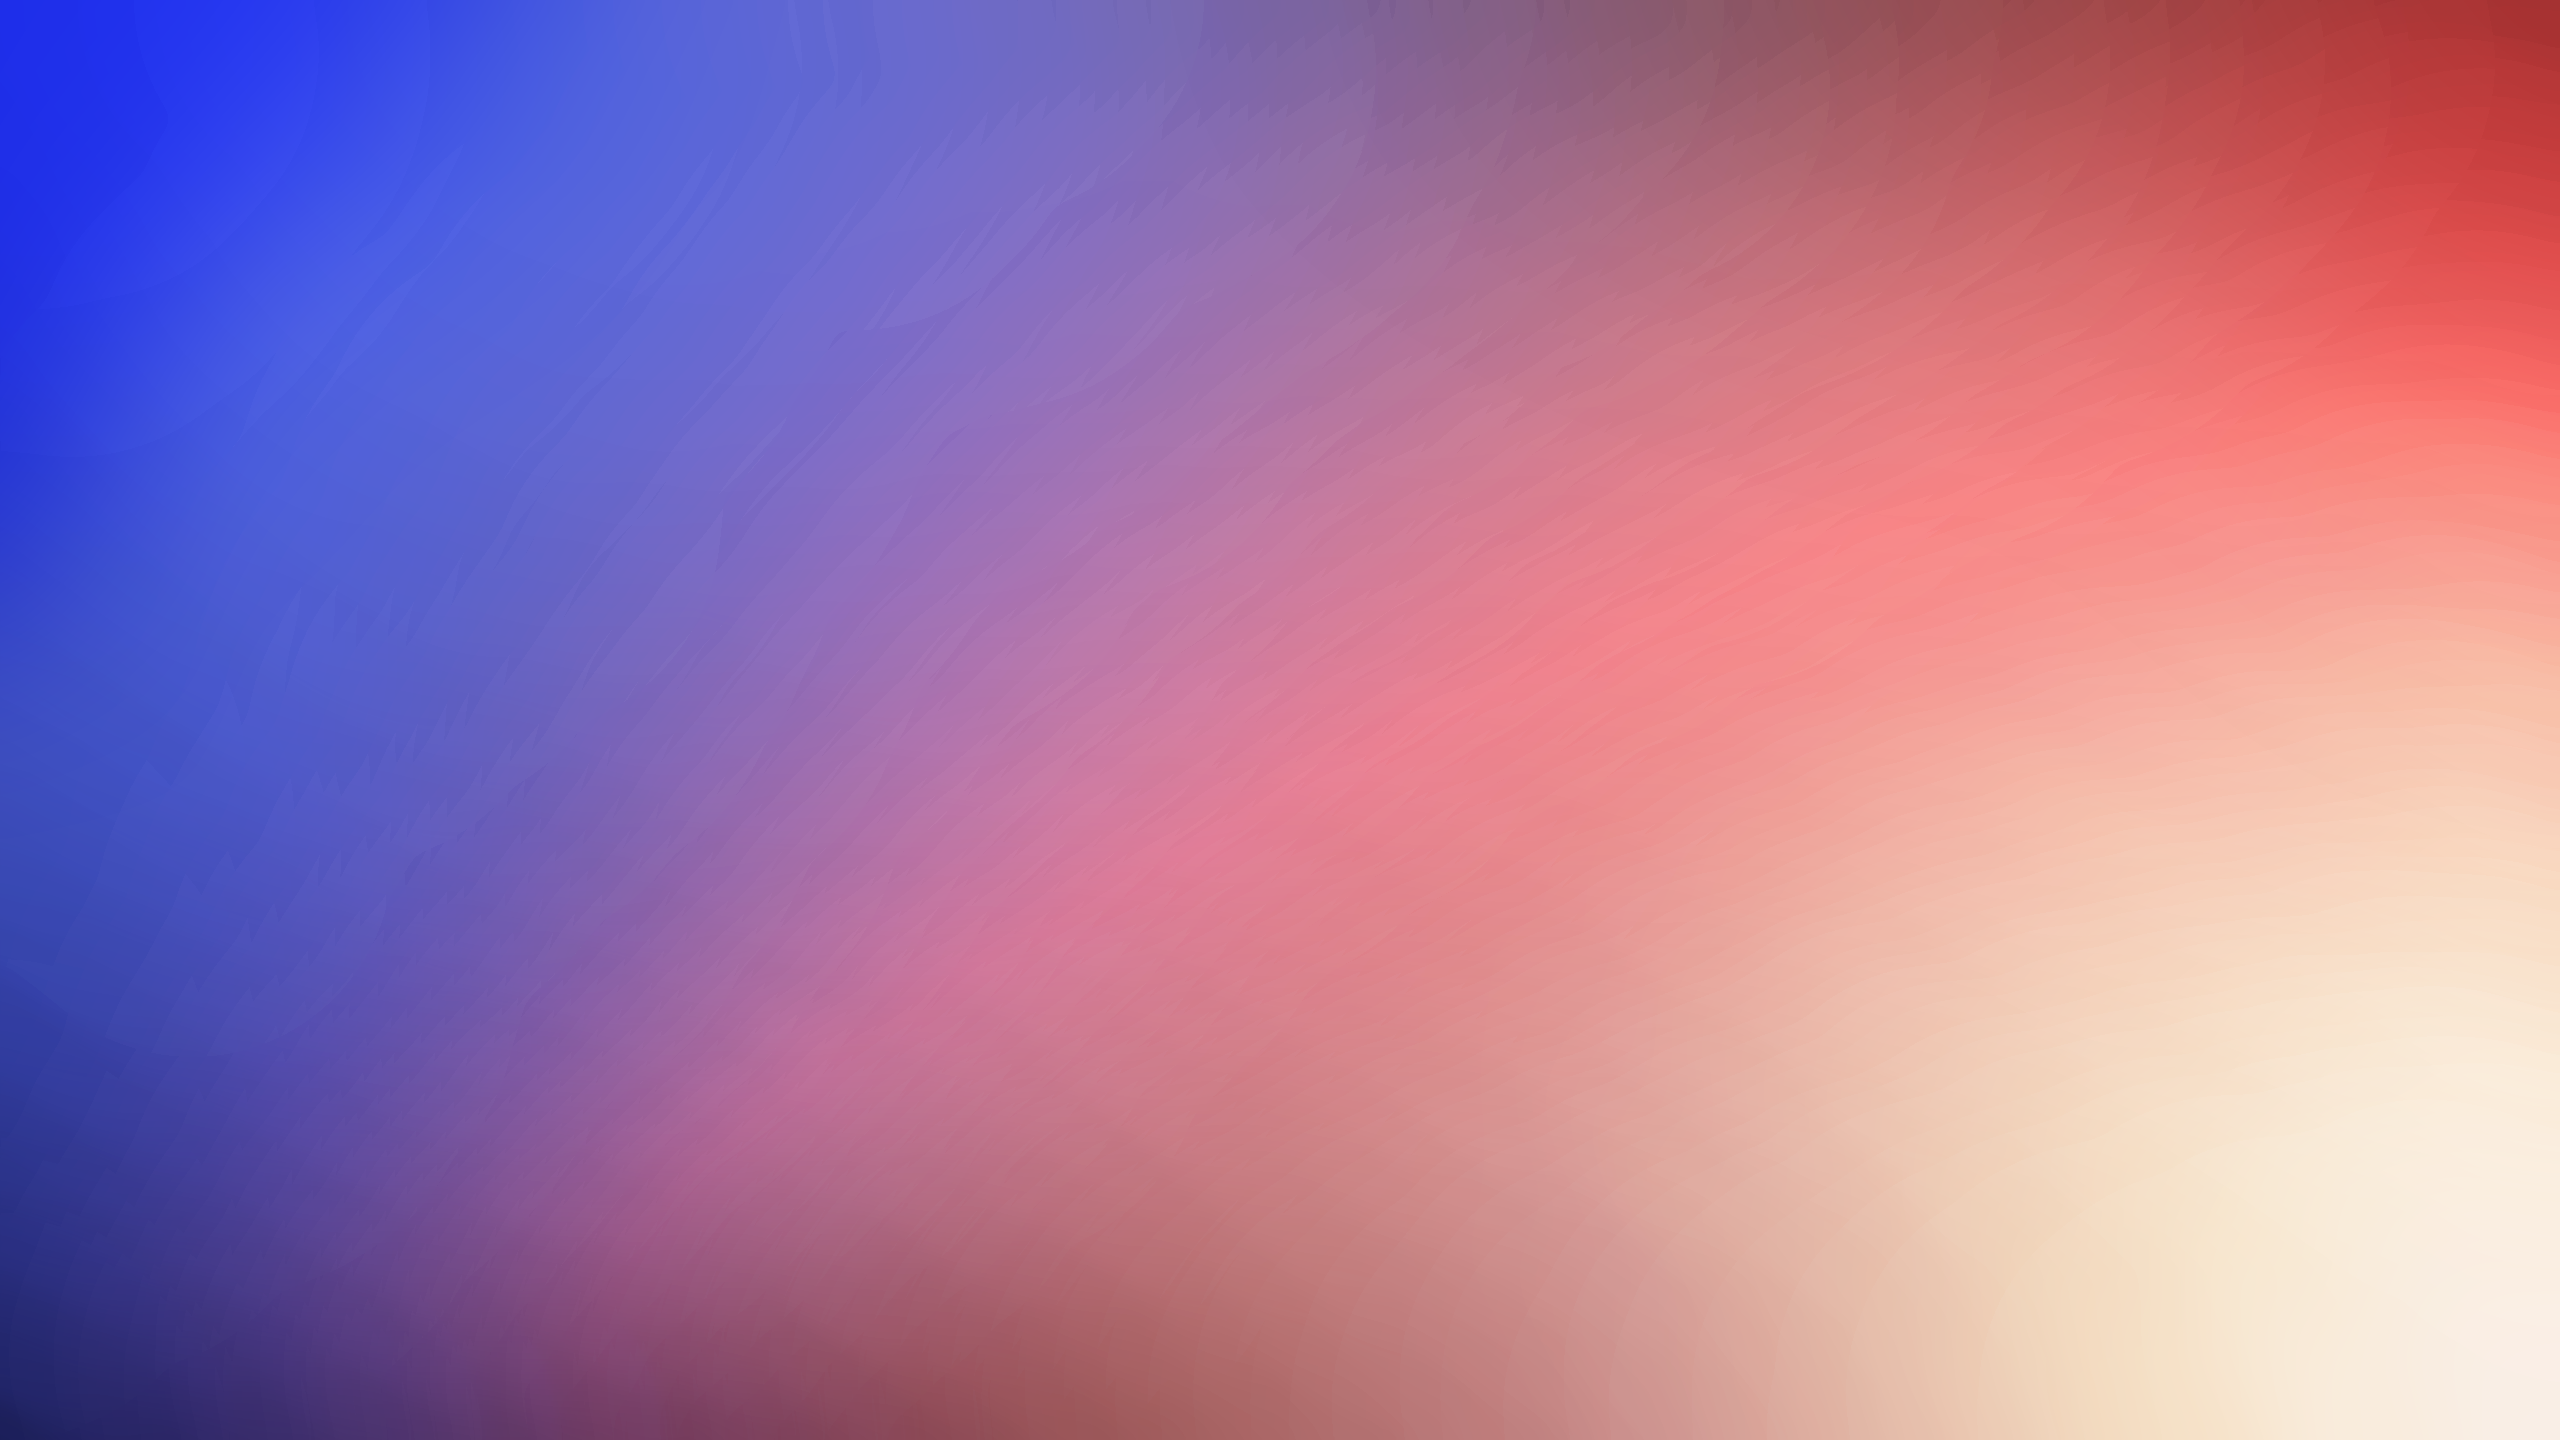 General 2560x1440 colorful abstract minimalism